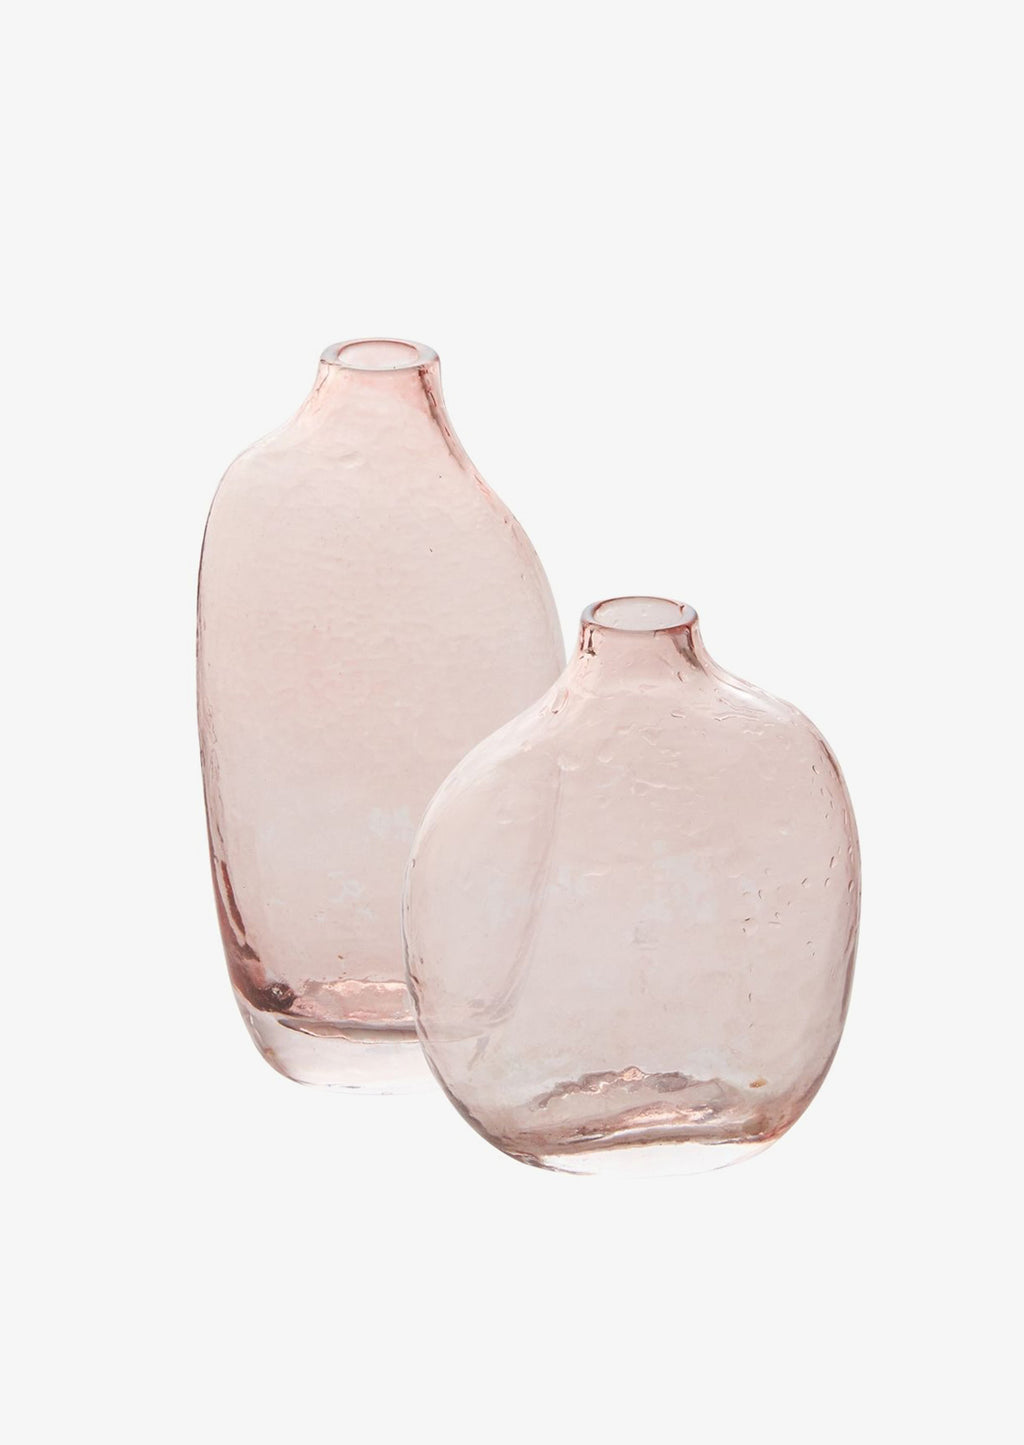 2: Clear pink glass bud vases in short and tall sizes.